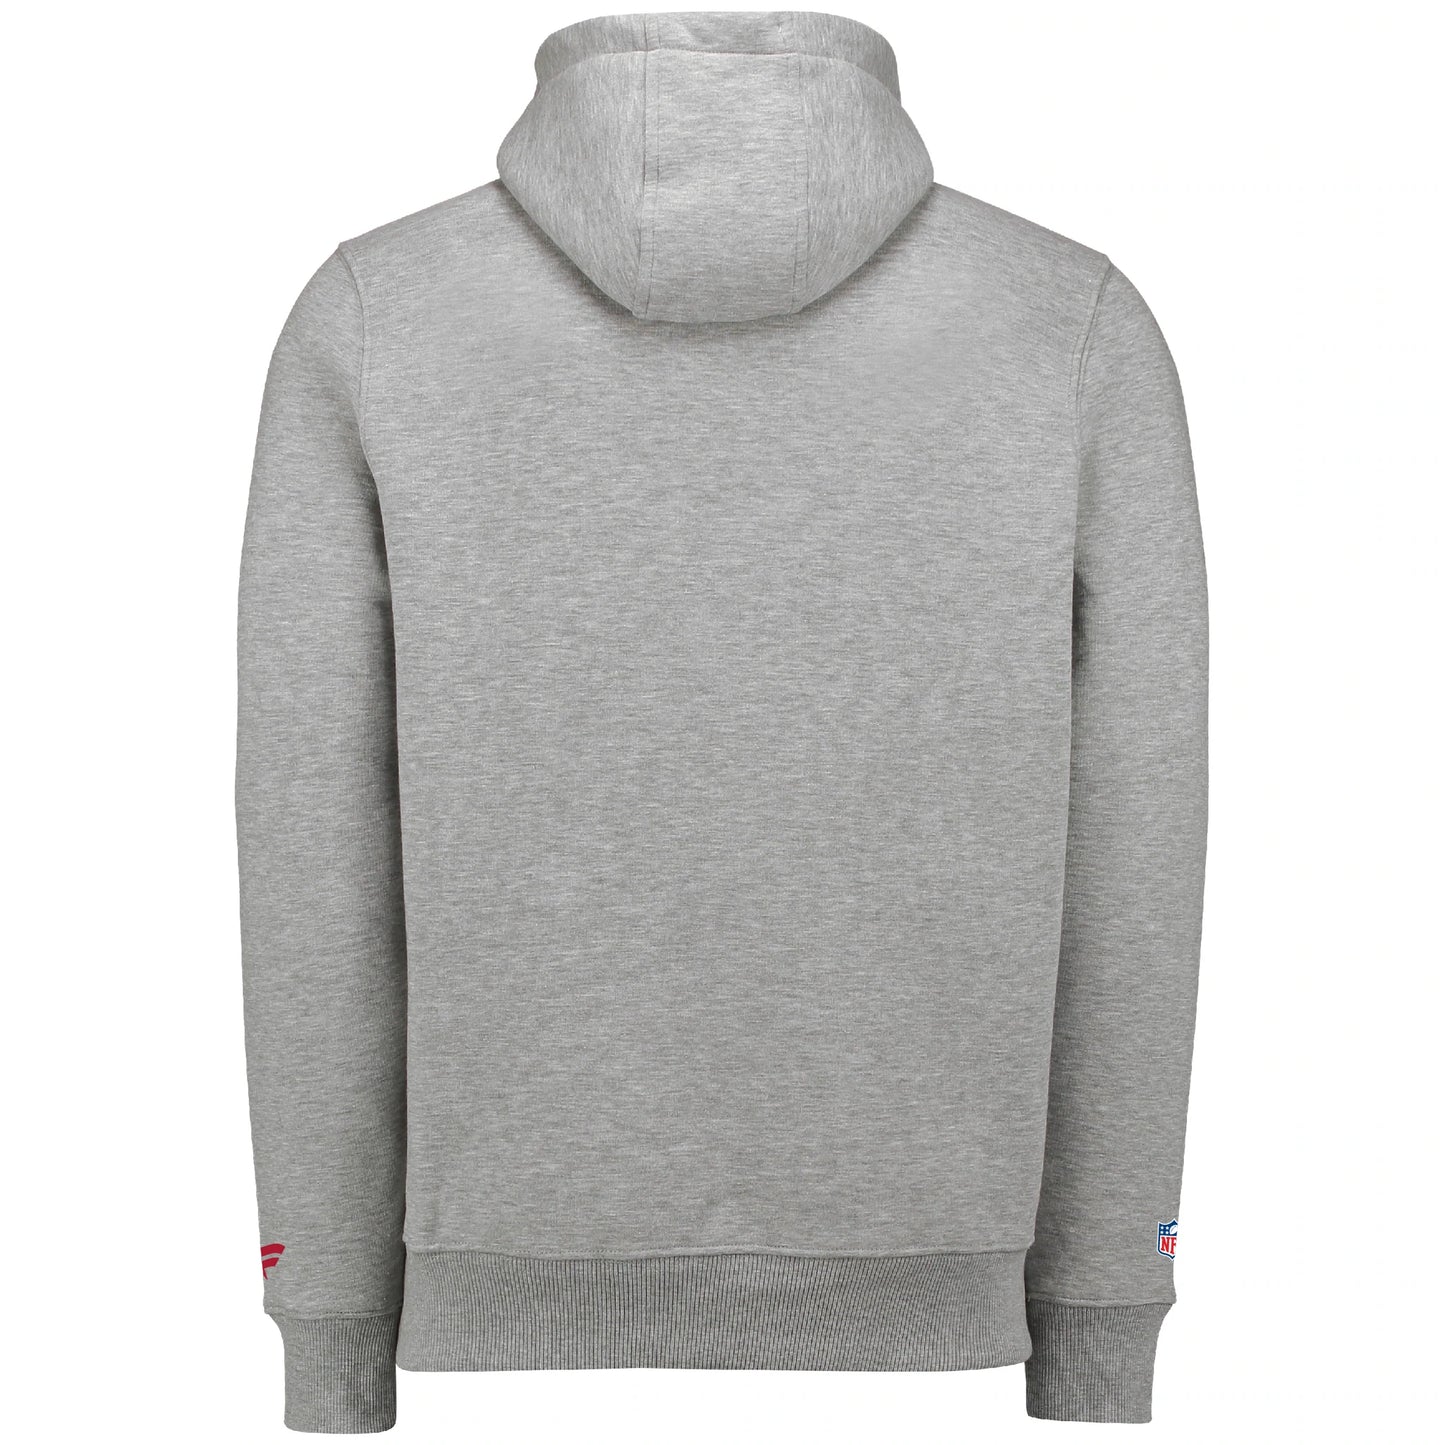 Fadeout Hoodie